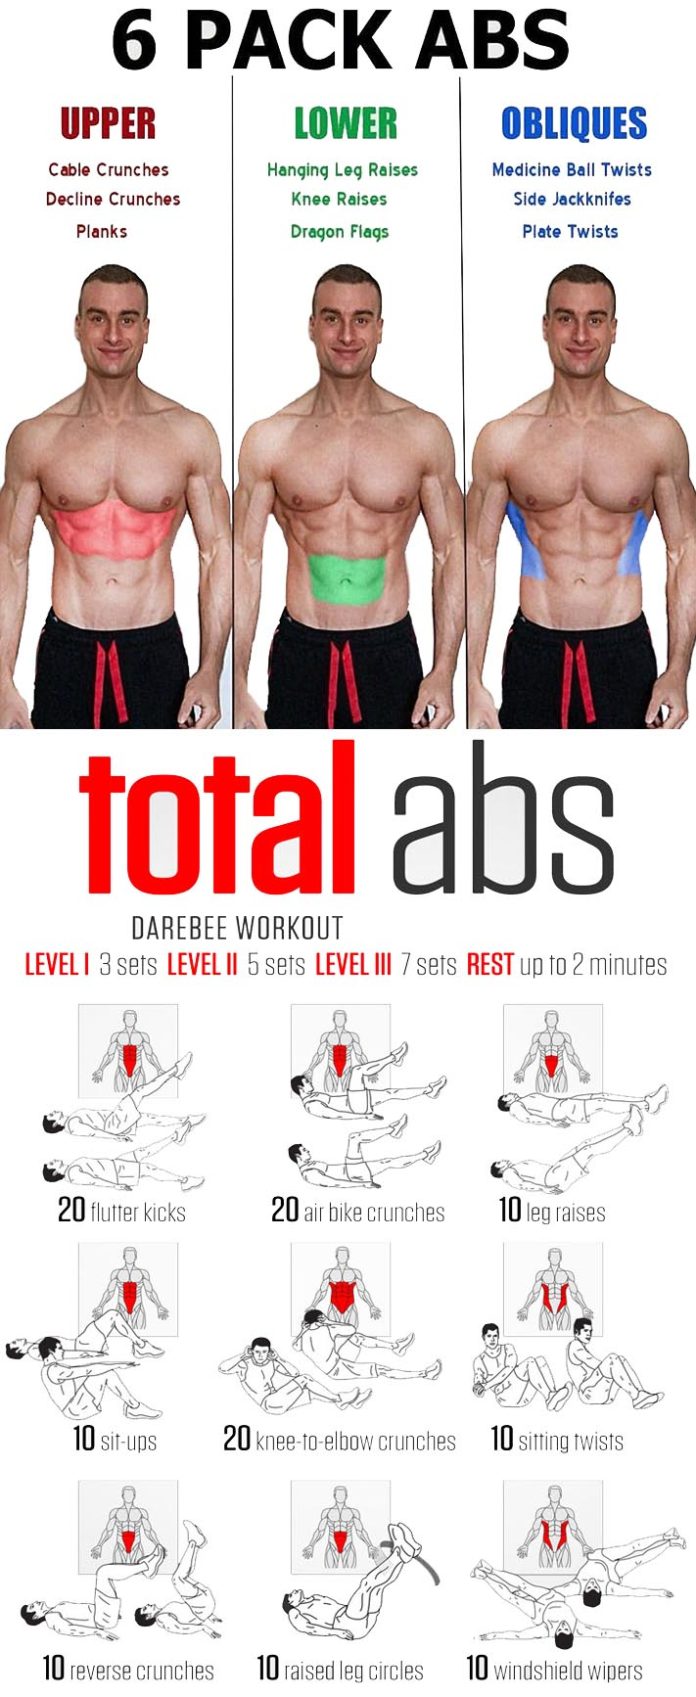 Pack Abs Picture Guide